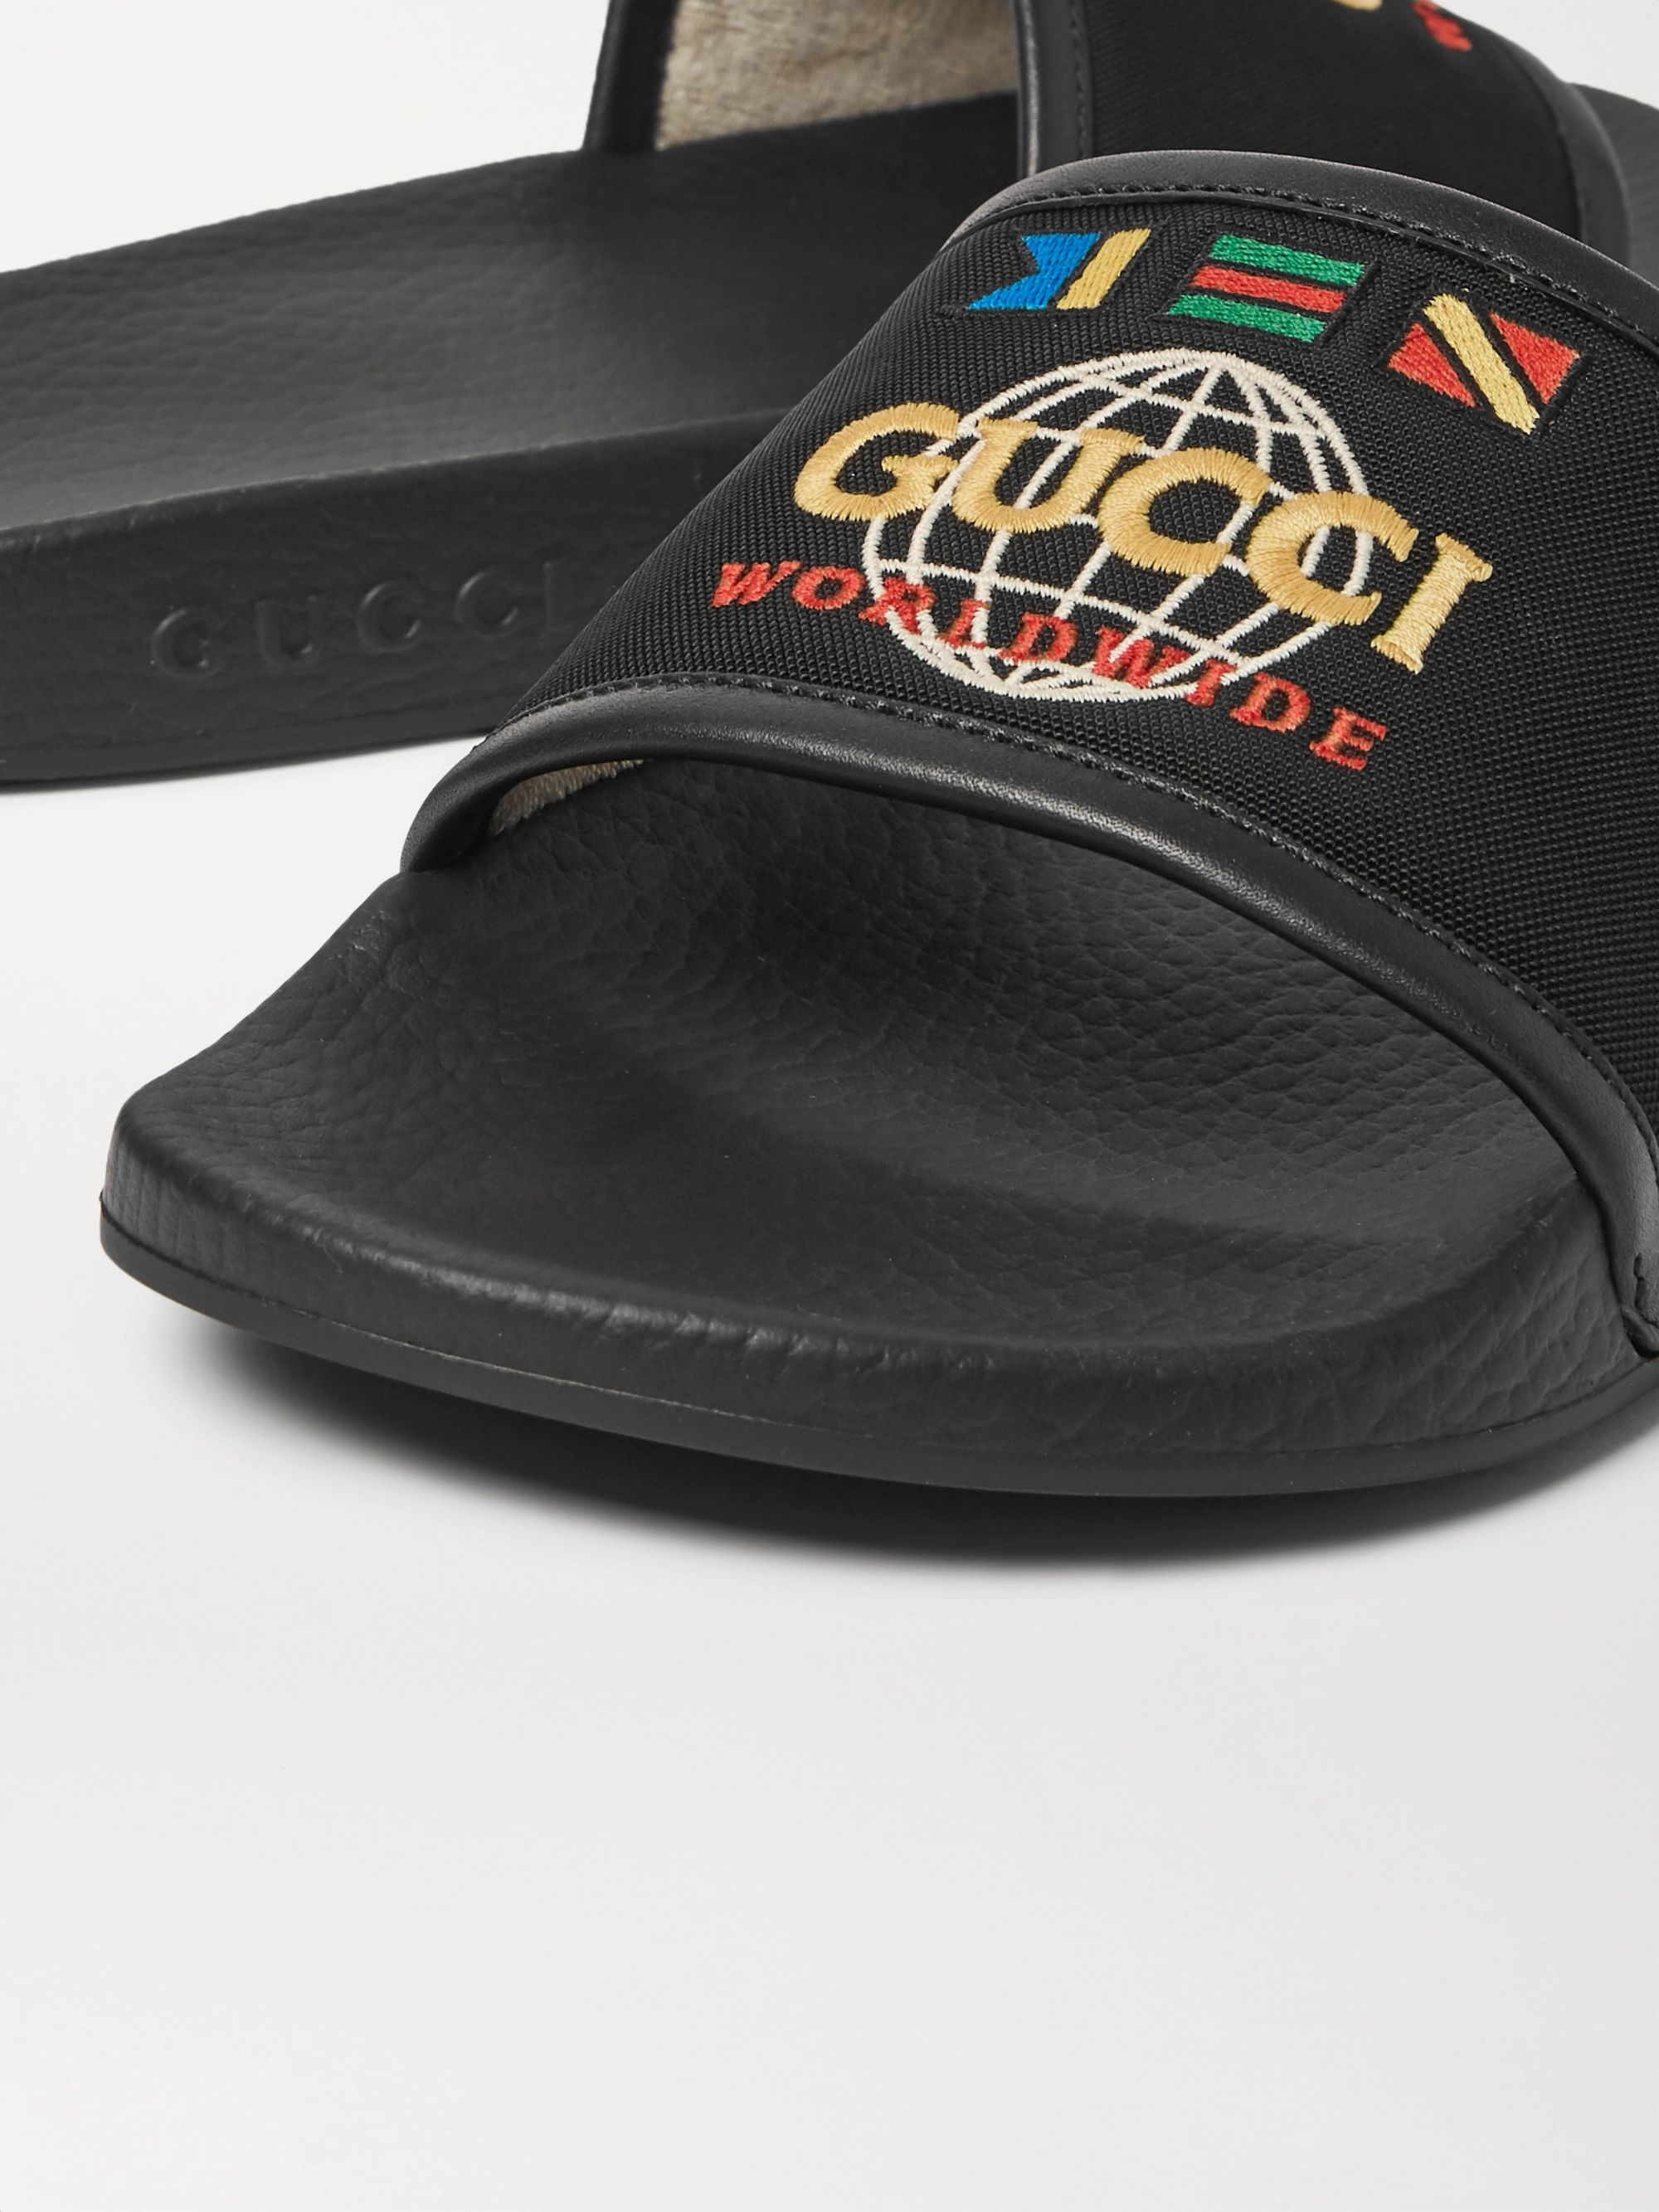 gucci embroidered slides